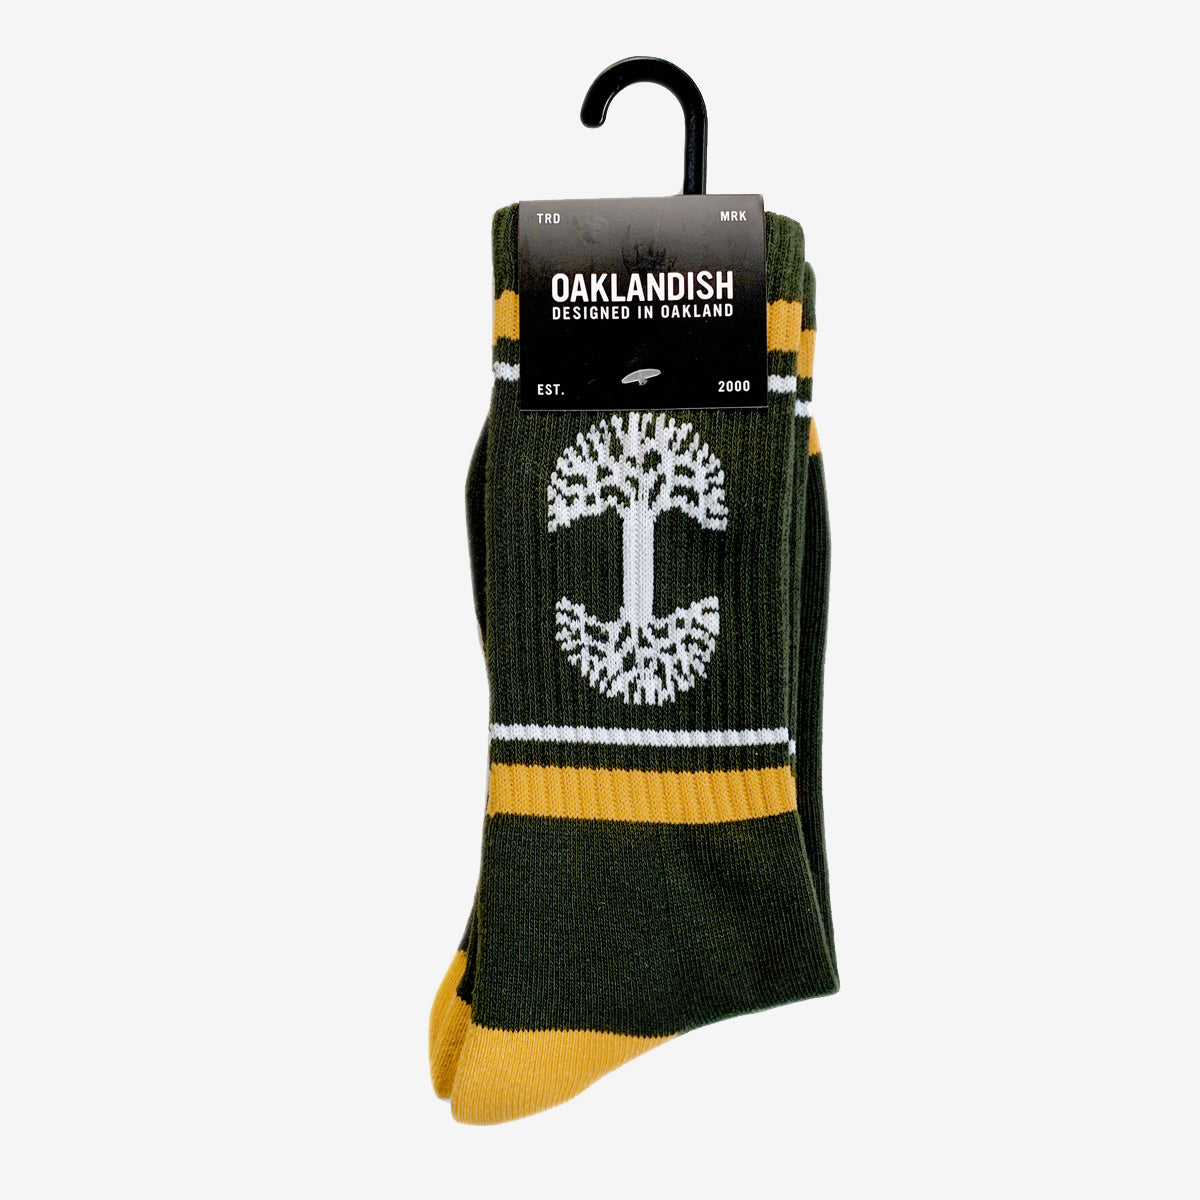 Green socks with white Oaklandish tree logo between yellow and white ankle stripes in Oaklandish retail packaging.